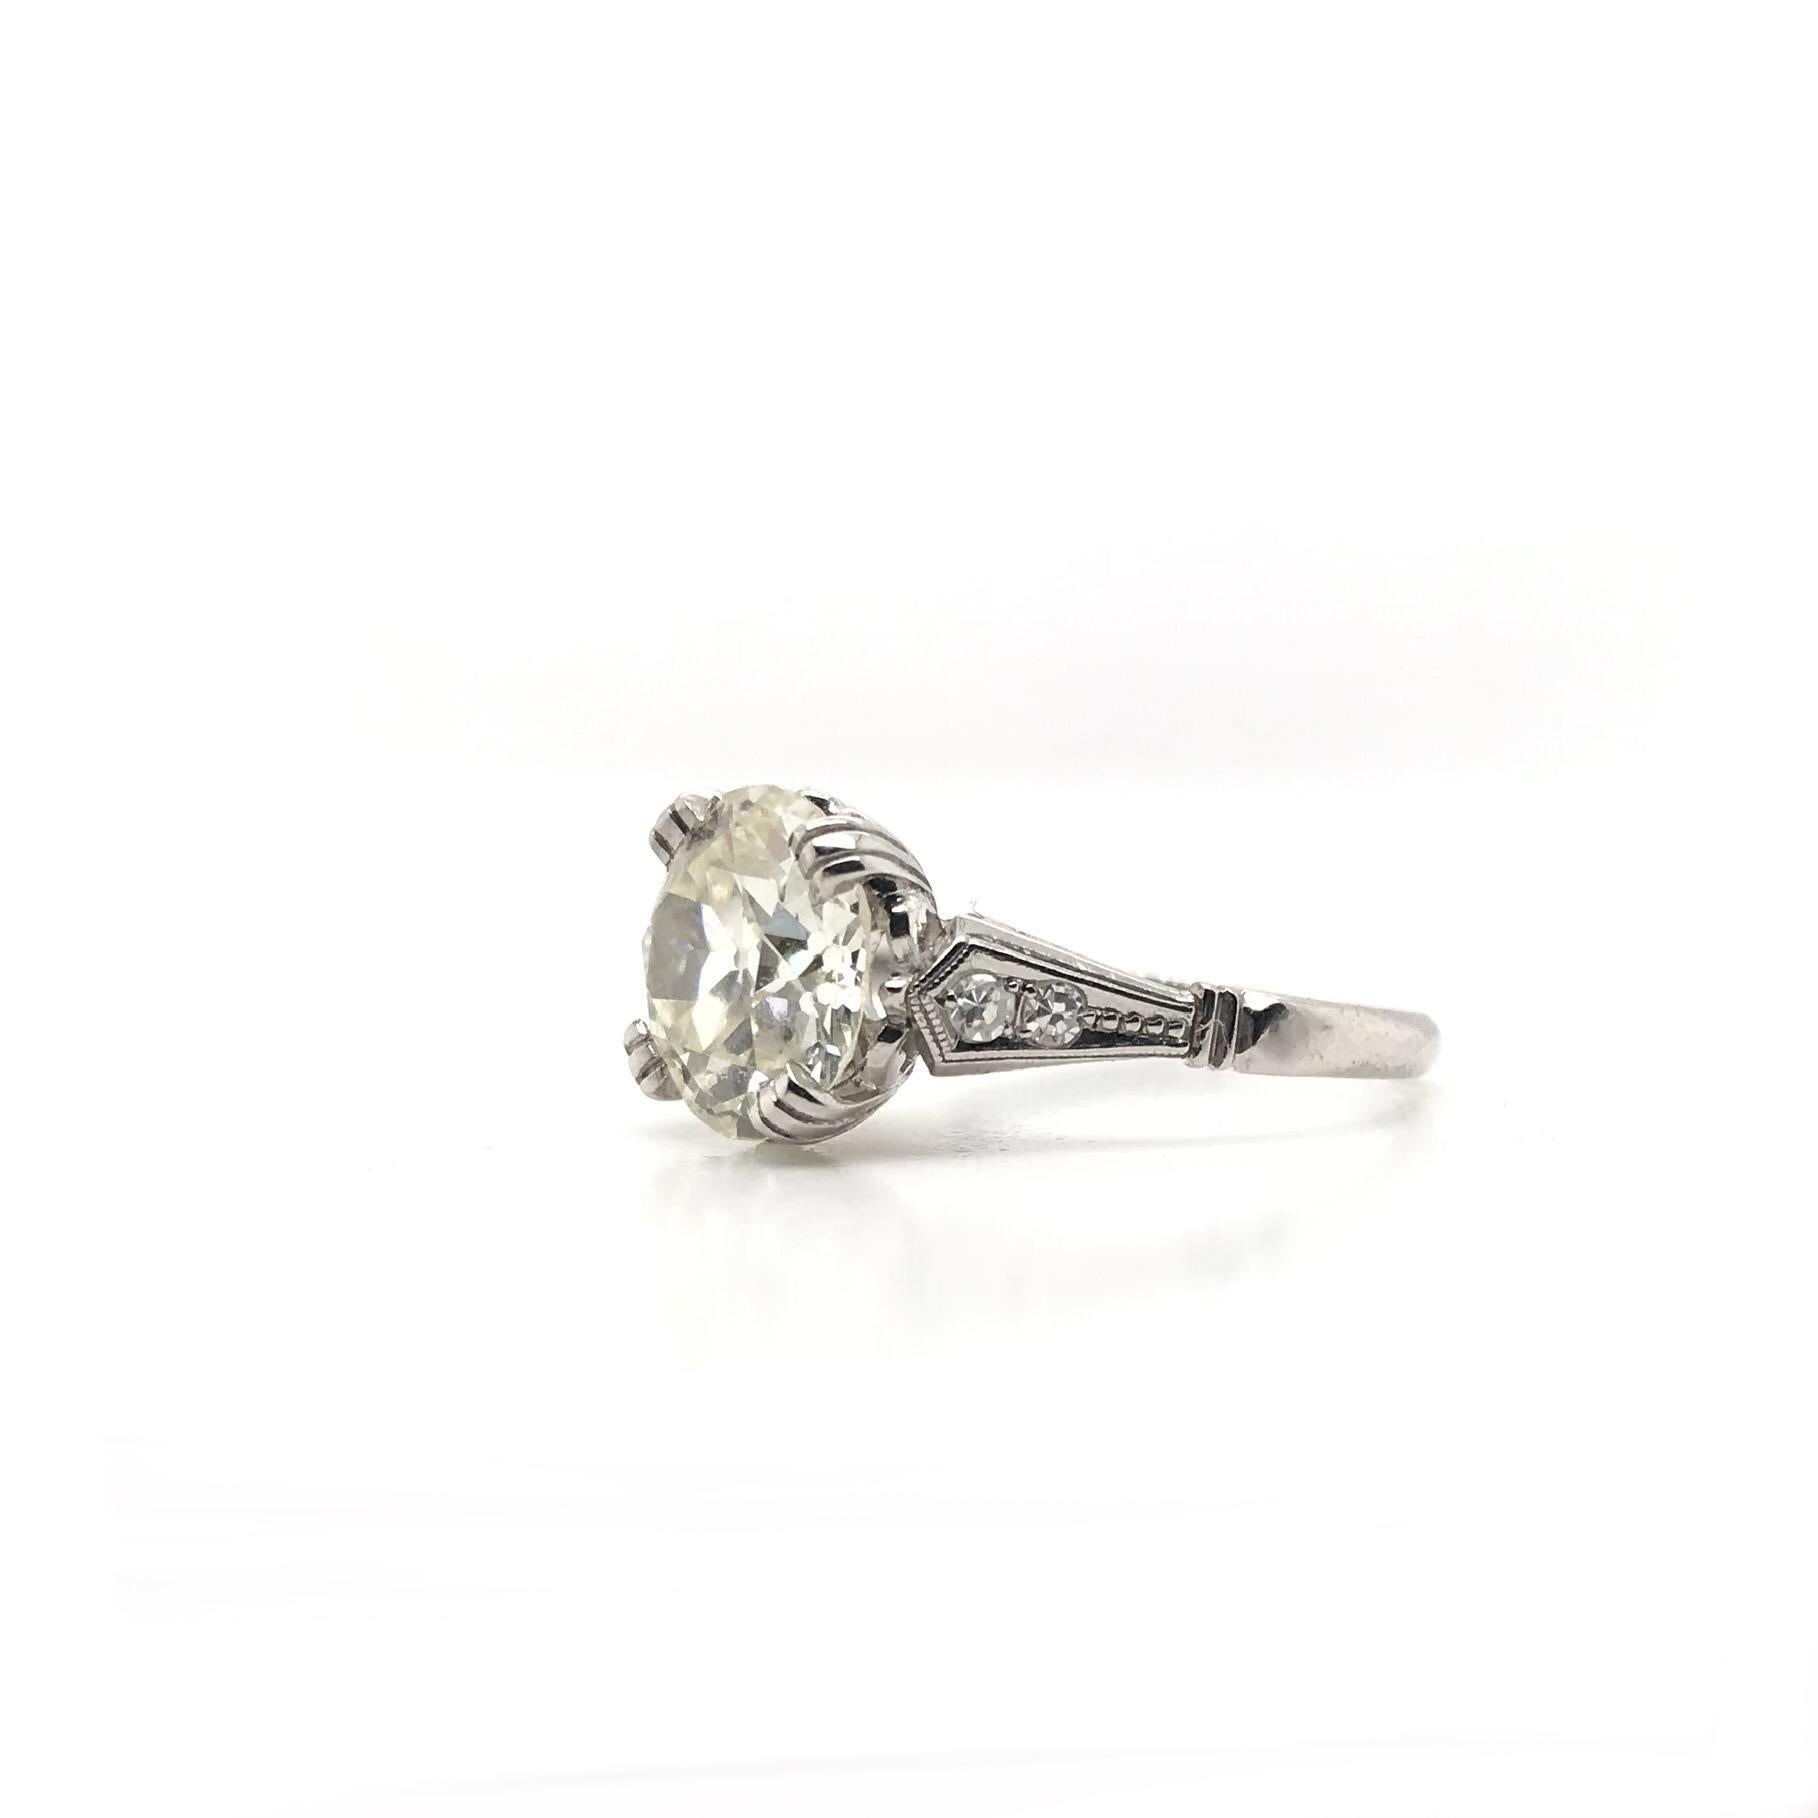 This stunning vintage piece was crafted sometime during the Mid Century design period (1940-1960). The platinum setting features a center diamond measuring approximately 2.41 carats. The center diamond has been certified by the Gemological Institute